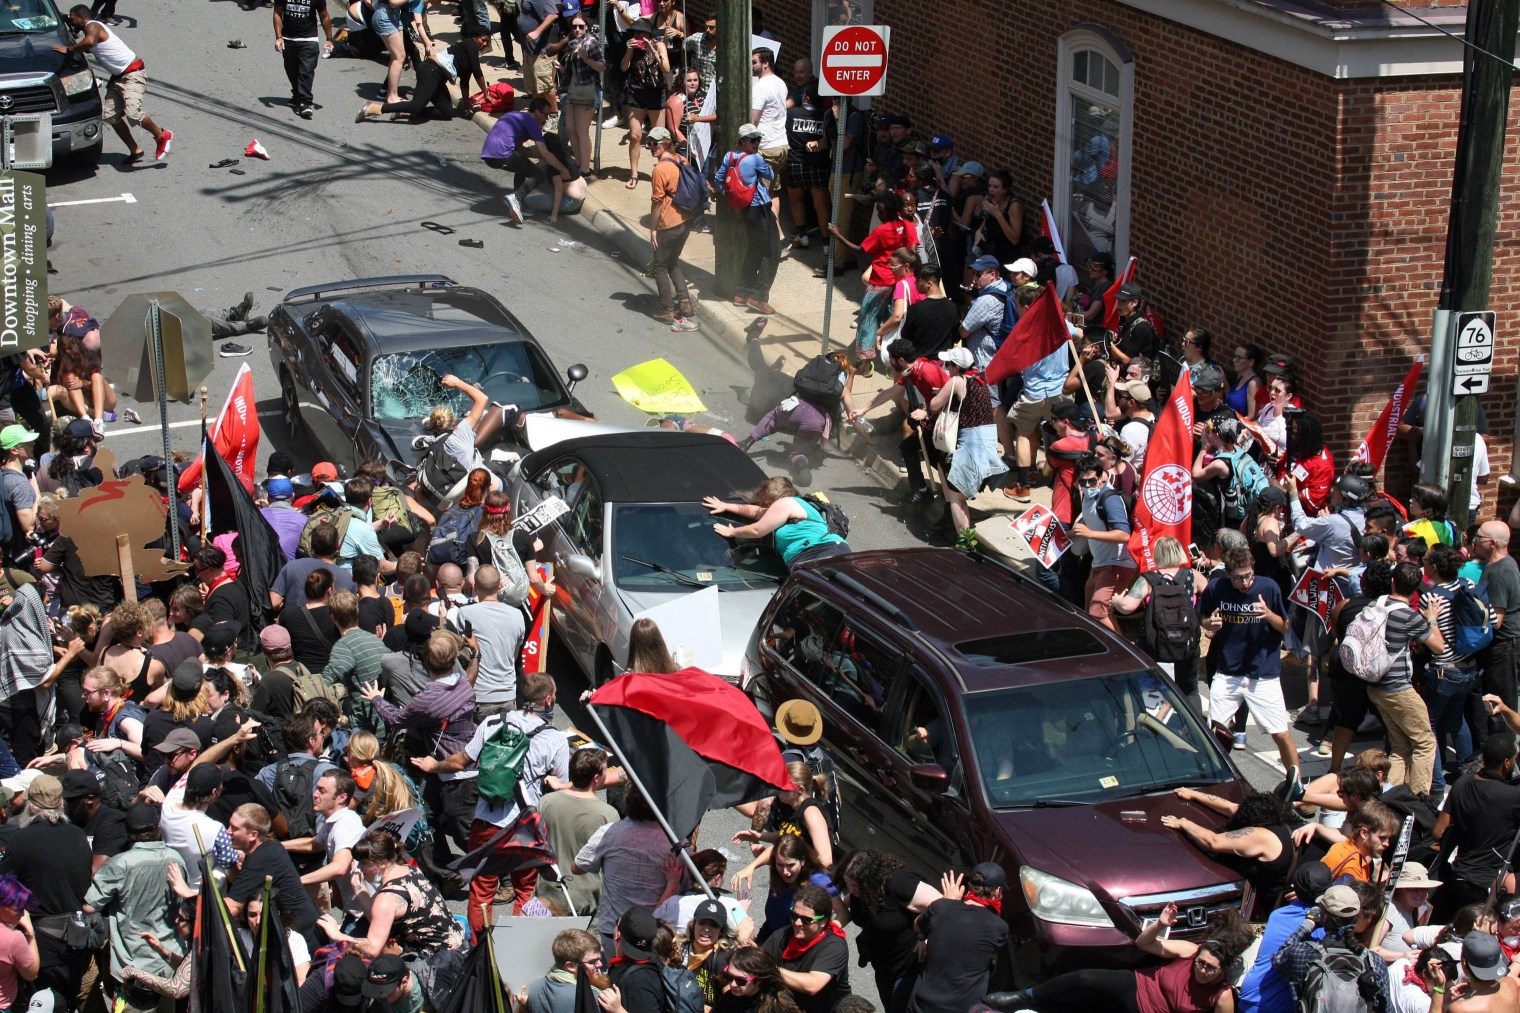 A gray car plows into pedestrians and vehicles as anti-white nationalism counter-protesters were marching through downtown Charlottesville, Va., on Aug. 12. The driver hit the knot of cars and people at high speed, then backed up and fled the scene.